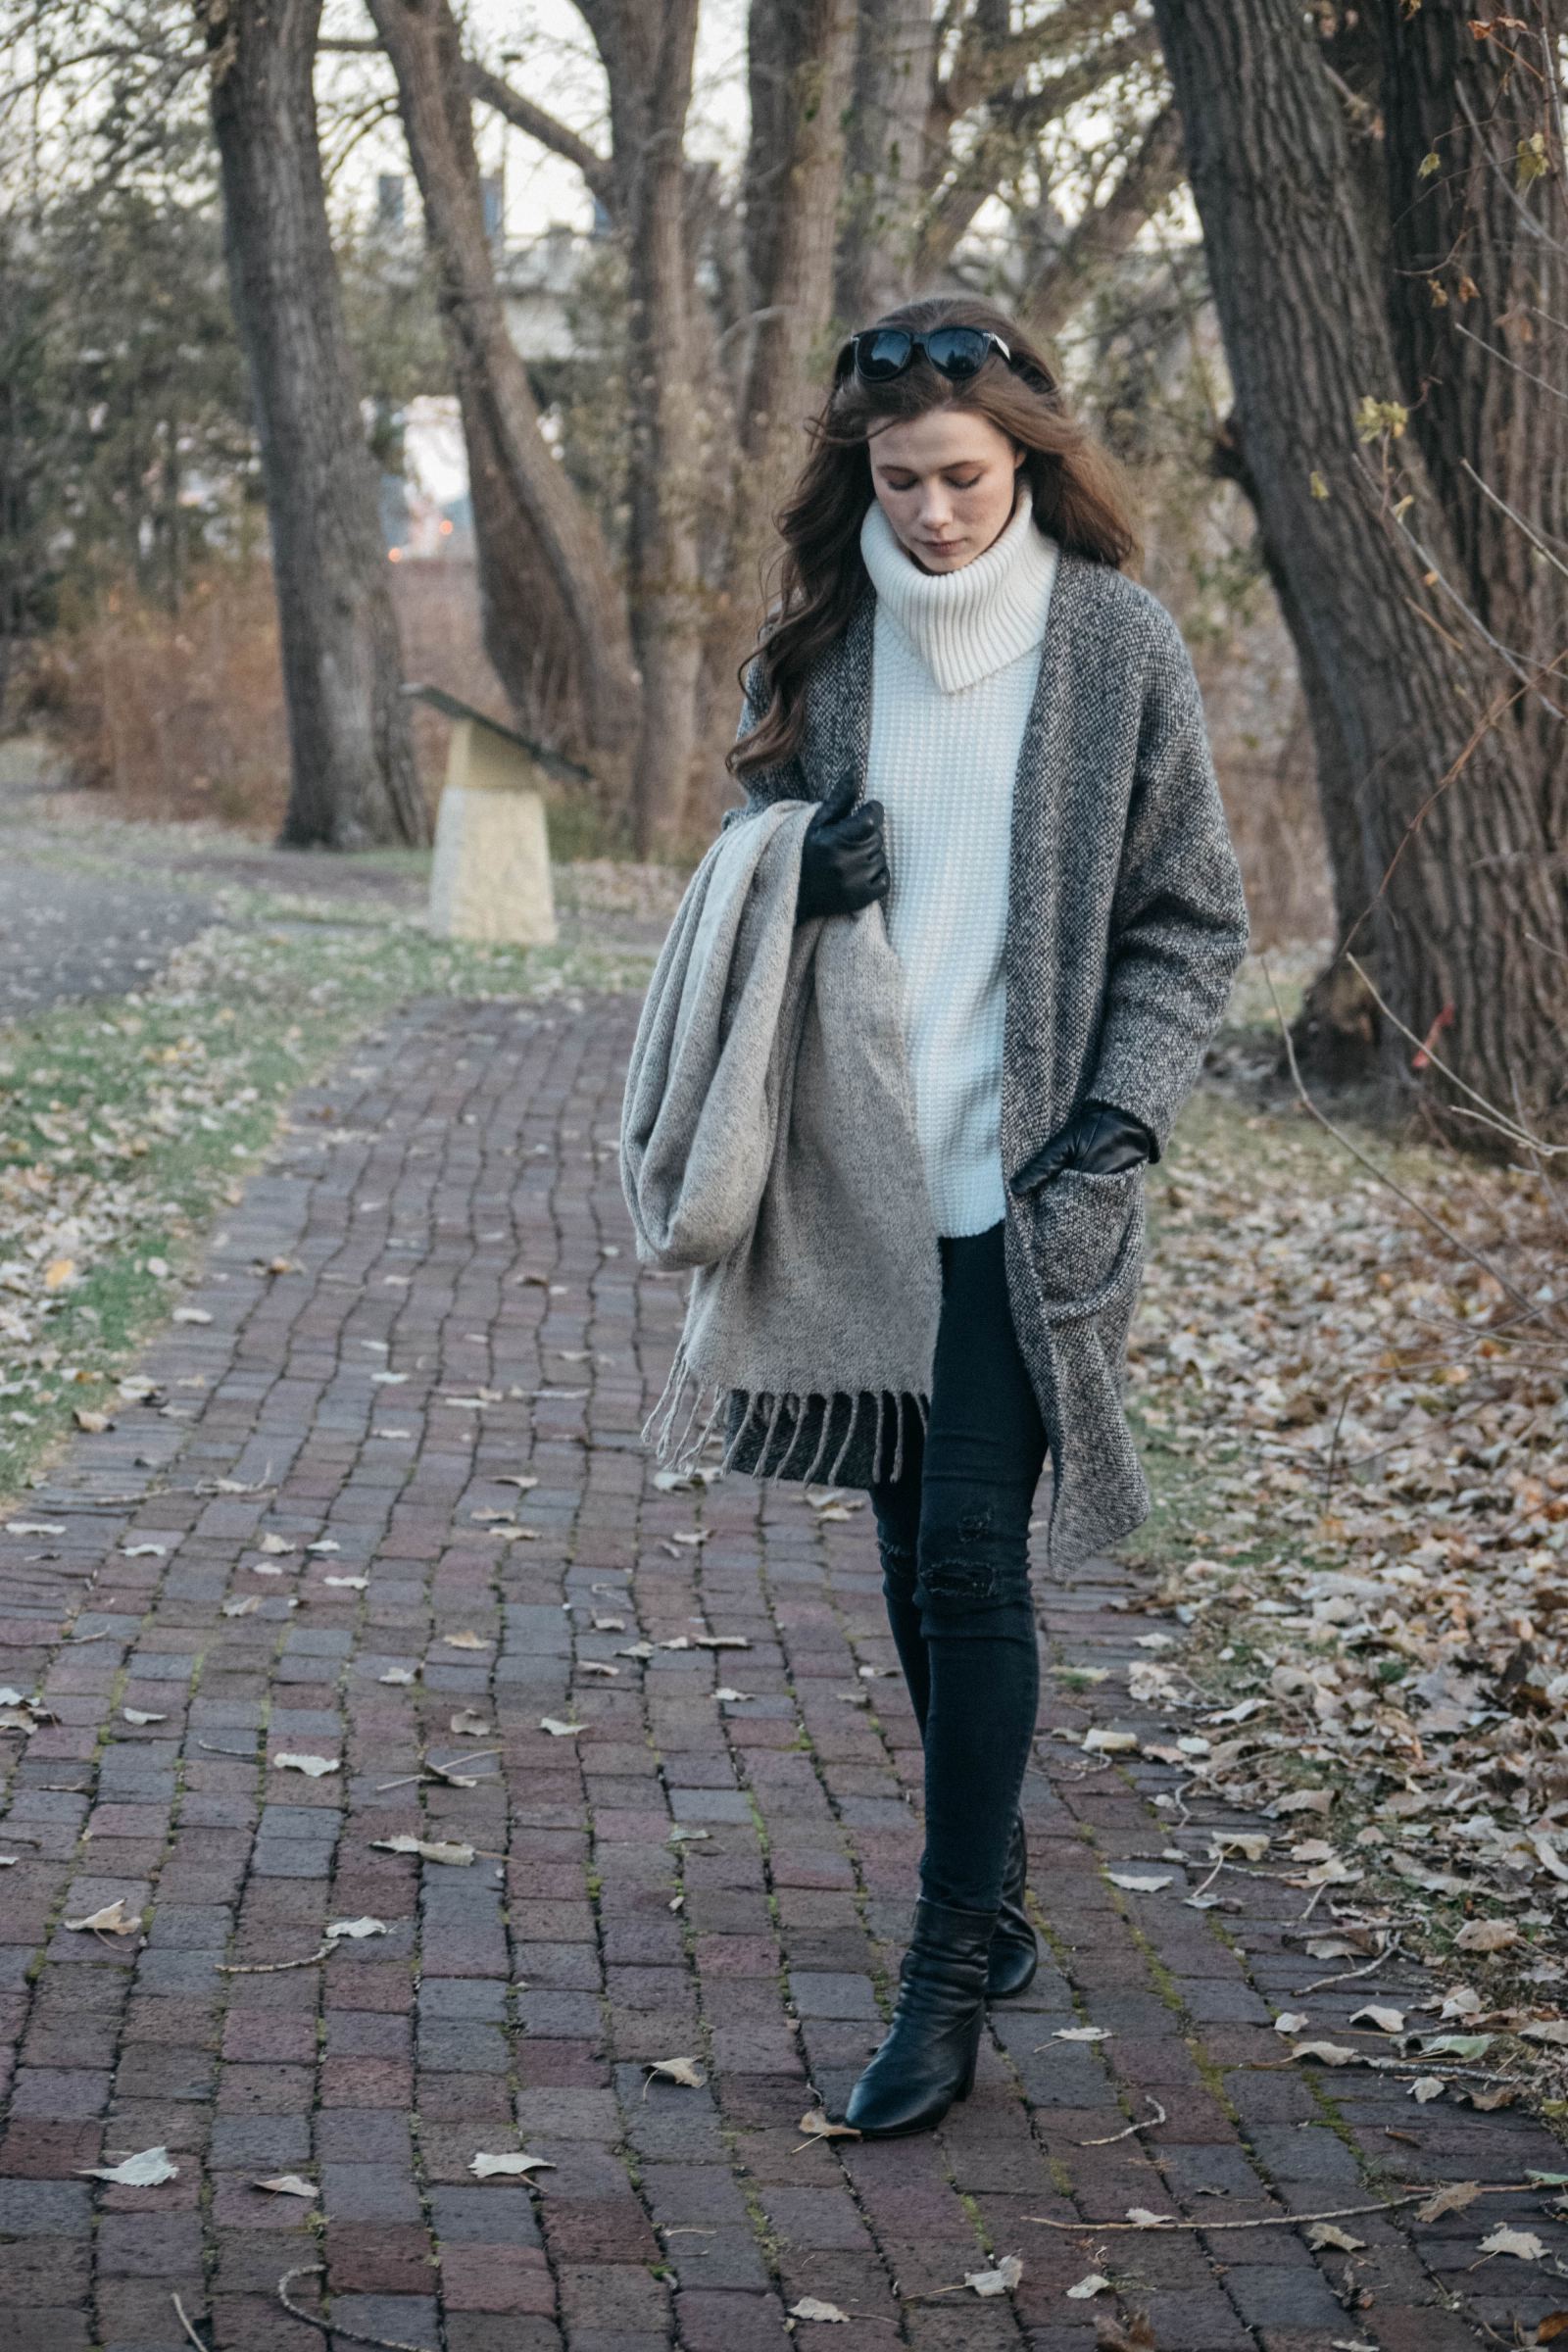 UNIQLO, sweater coat, how to style, winter fashion, topshop, topshop boots, white house black market, whbm, whbm denim, neutrals, winter fashion 2017, monochrome minimalist, minimalist fashion, winter trends, layering, target style, turtleneck knits